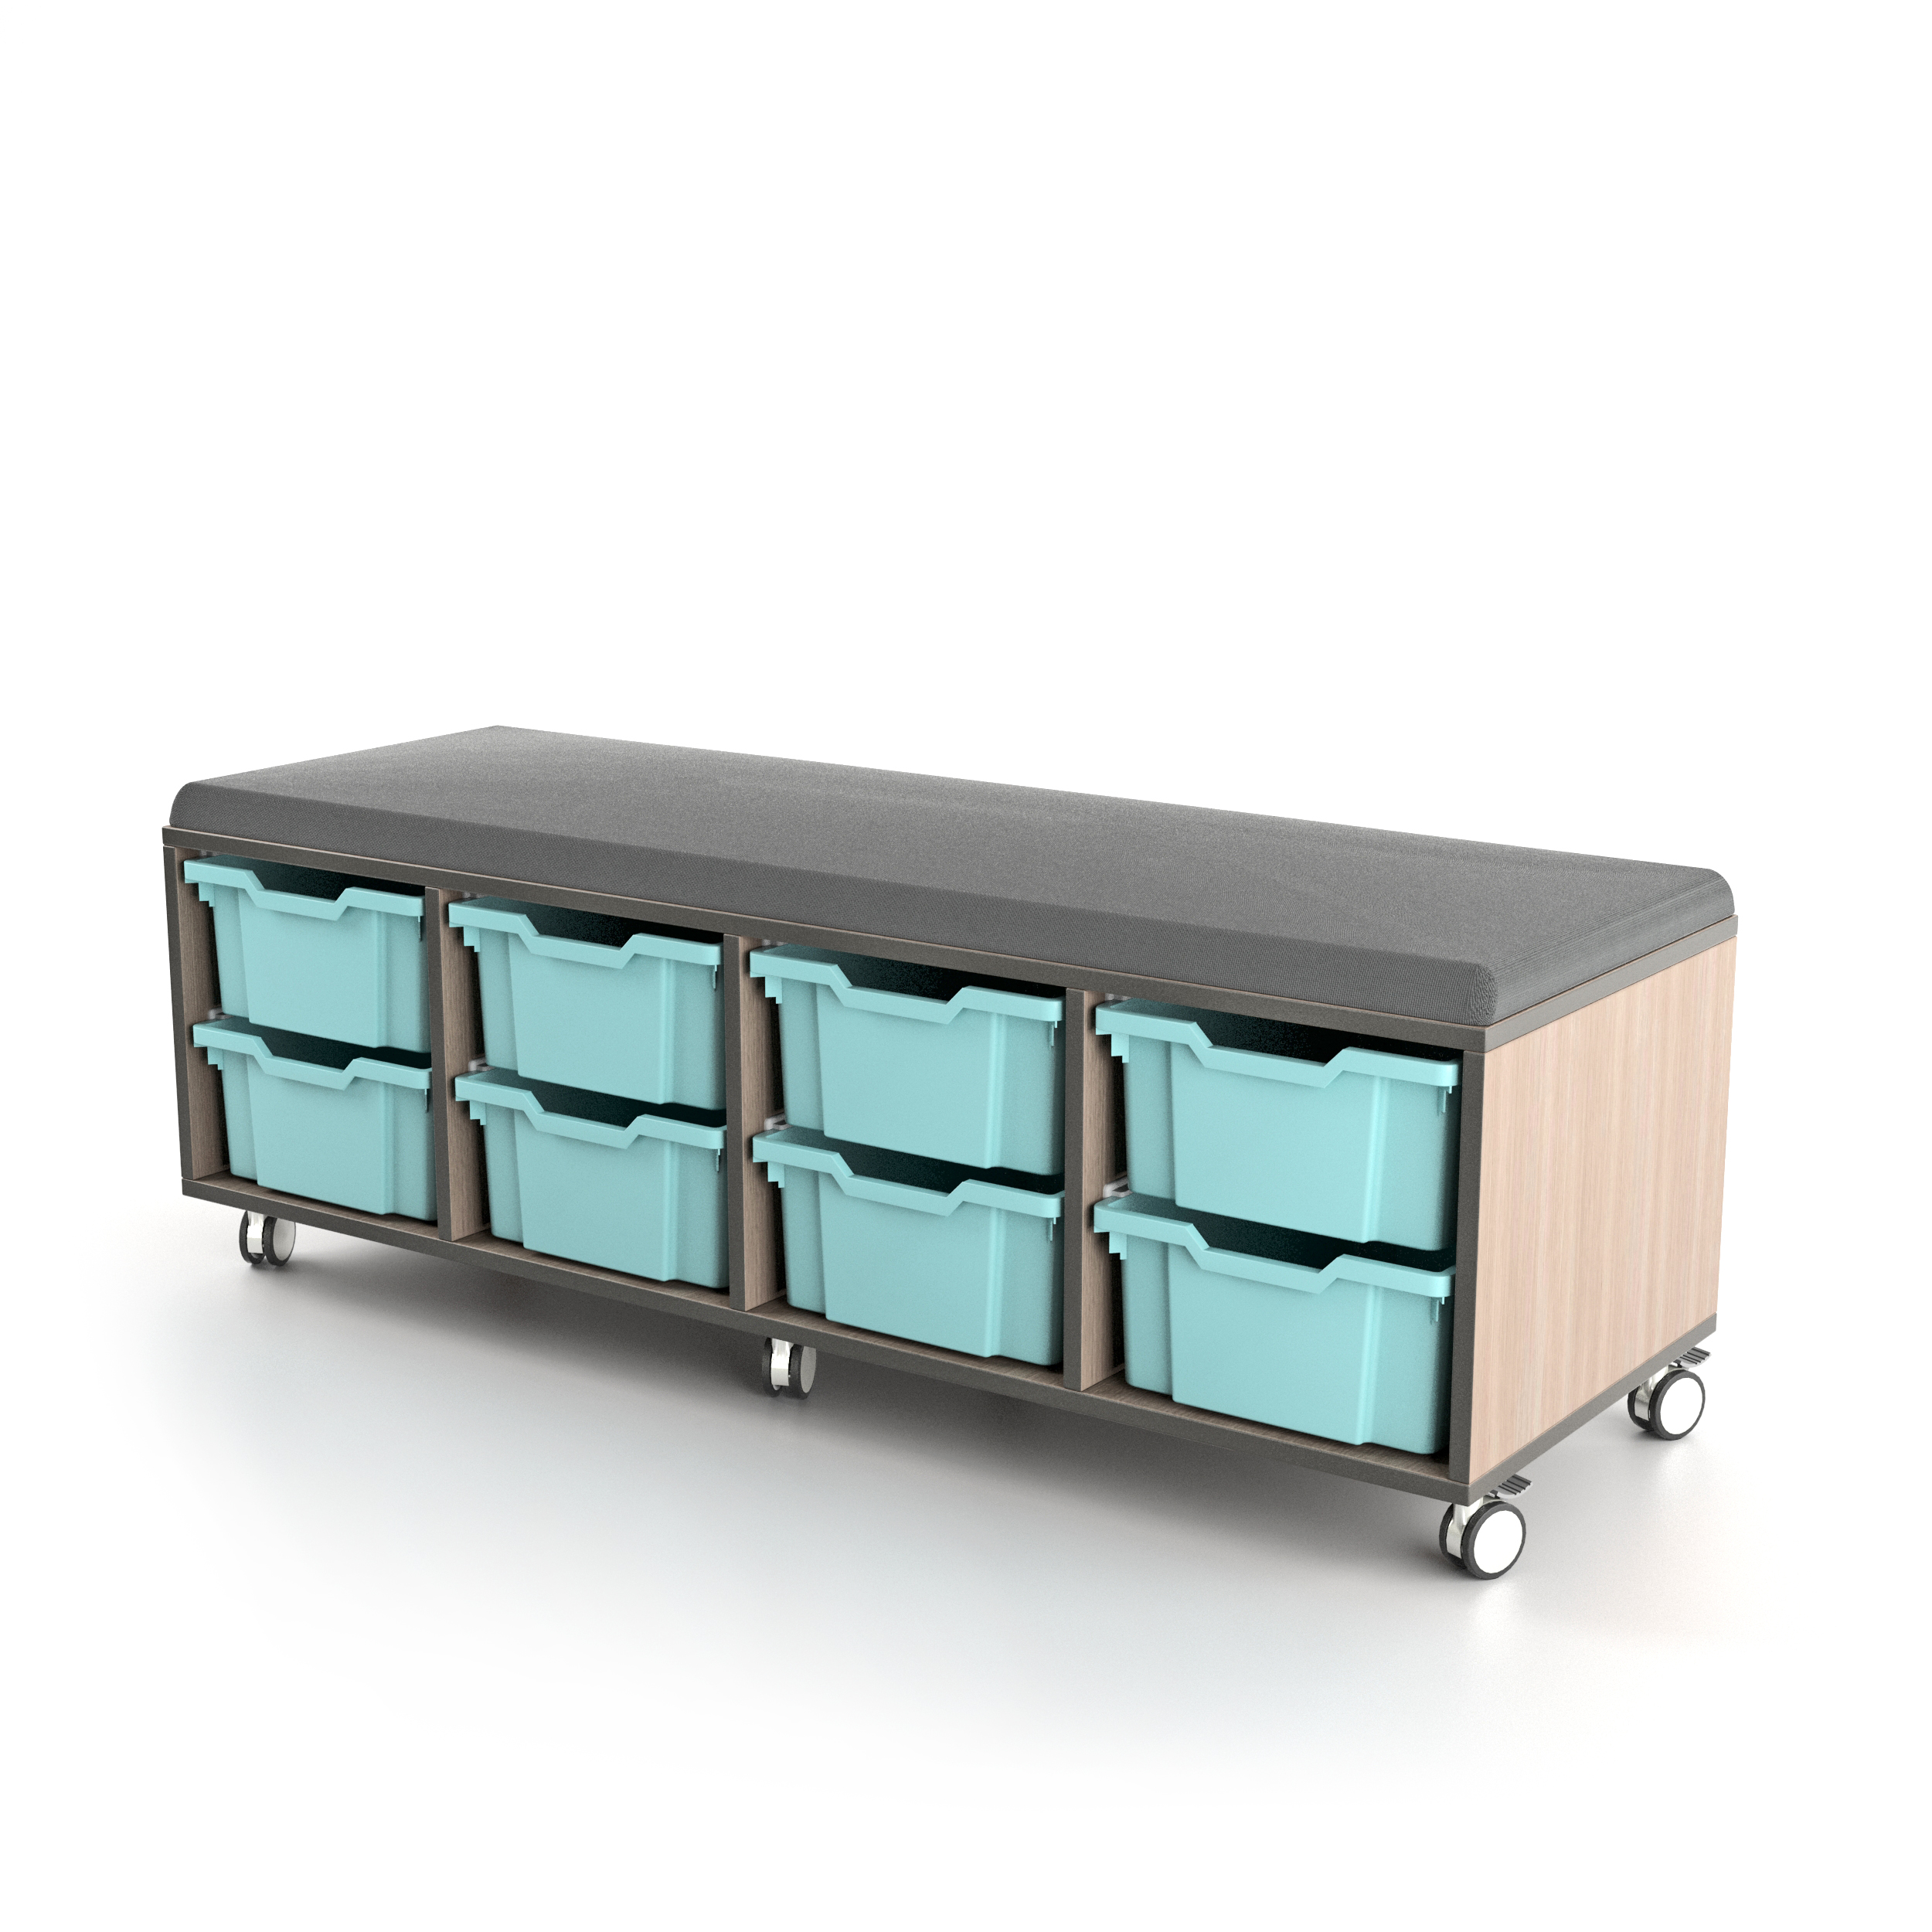 https://norvanivel.com/wp-content/uploads/2020/07/NorvaNivel_STORE_AND_DRAW_Upholstered_Caddy_8_Tub.jpg